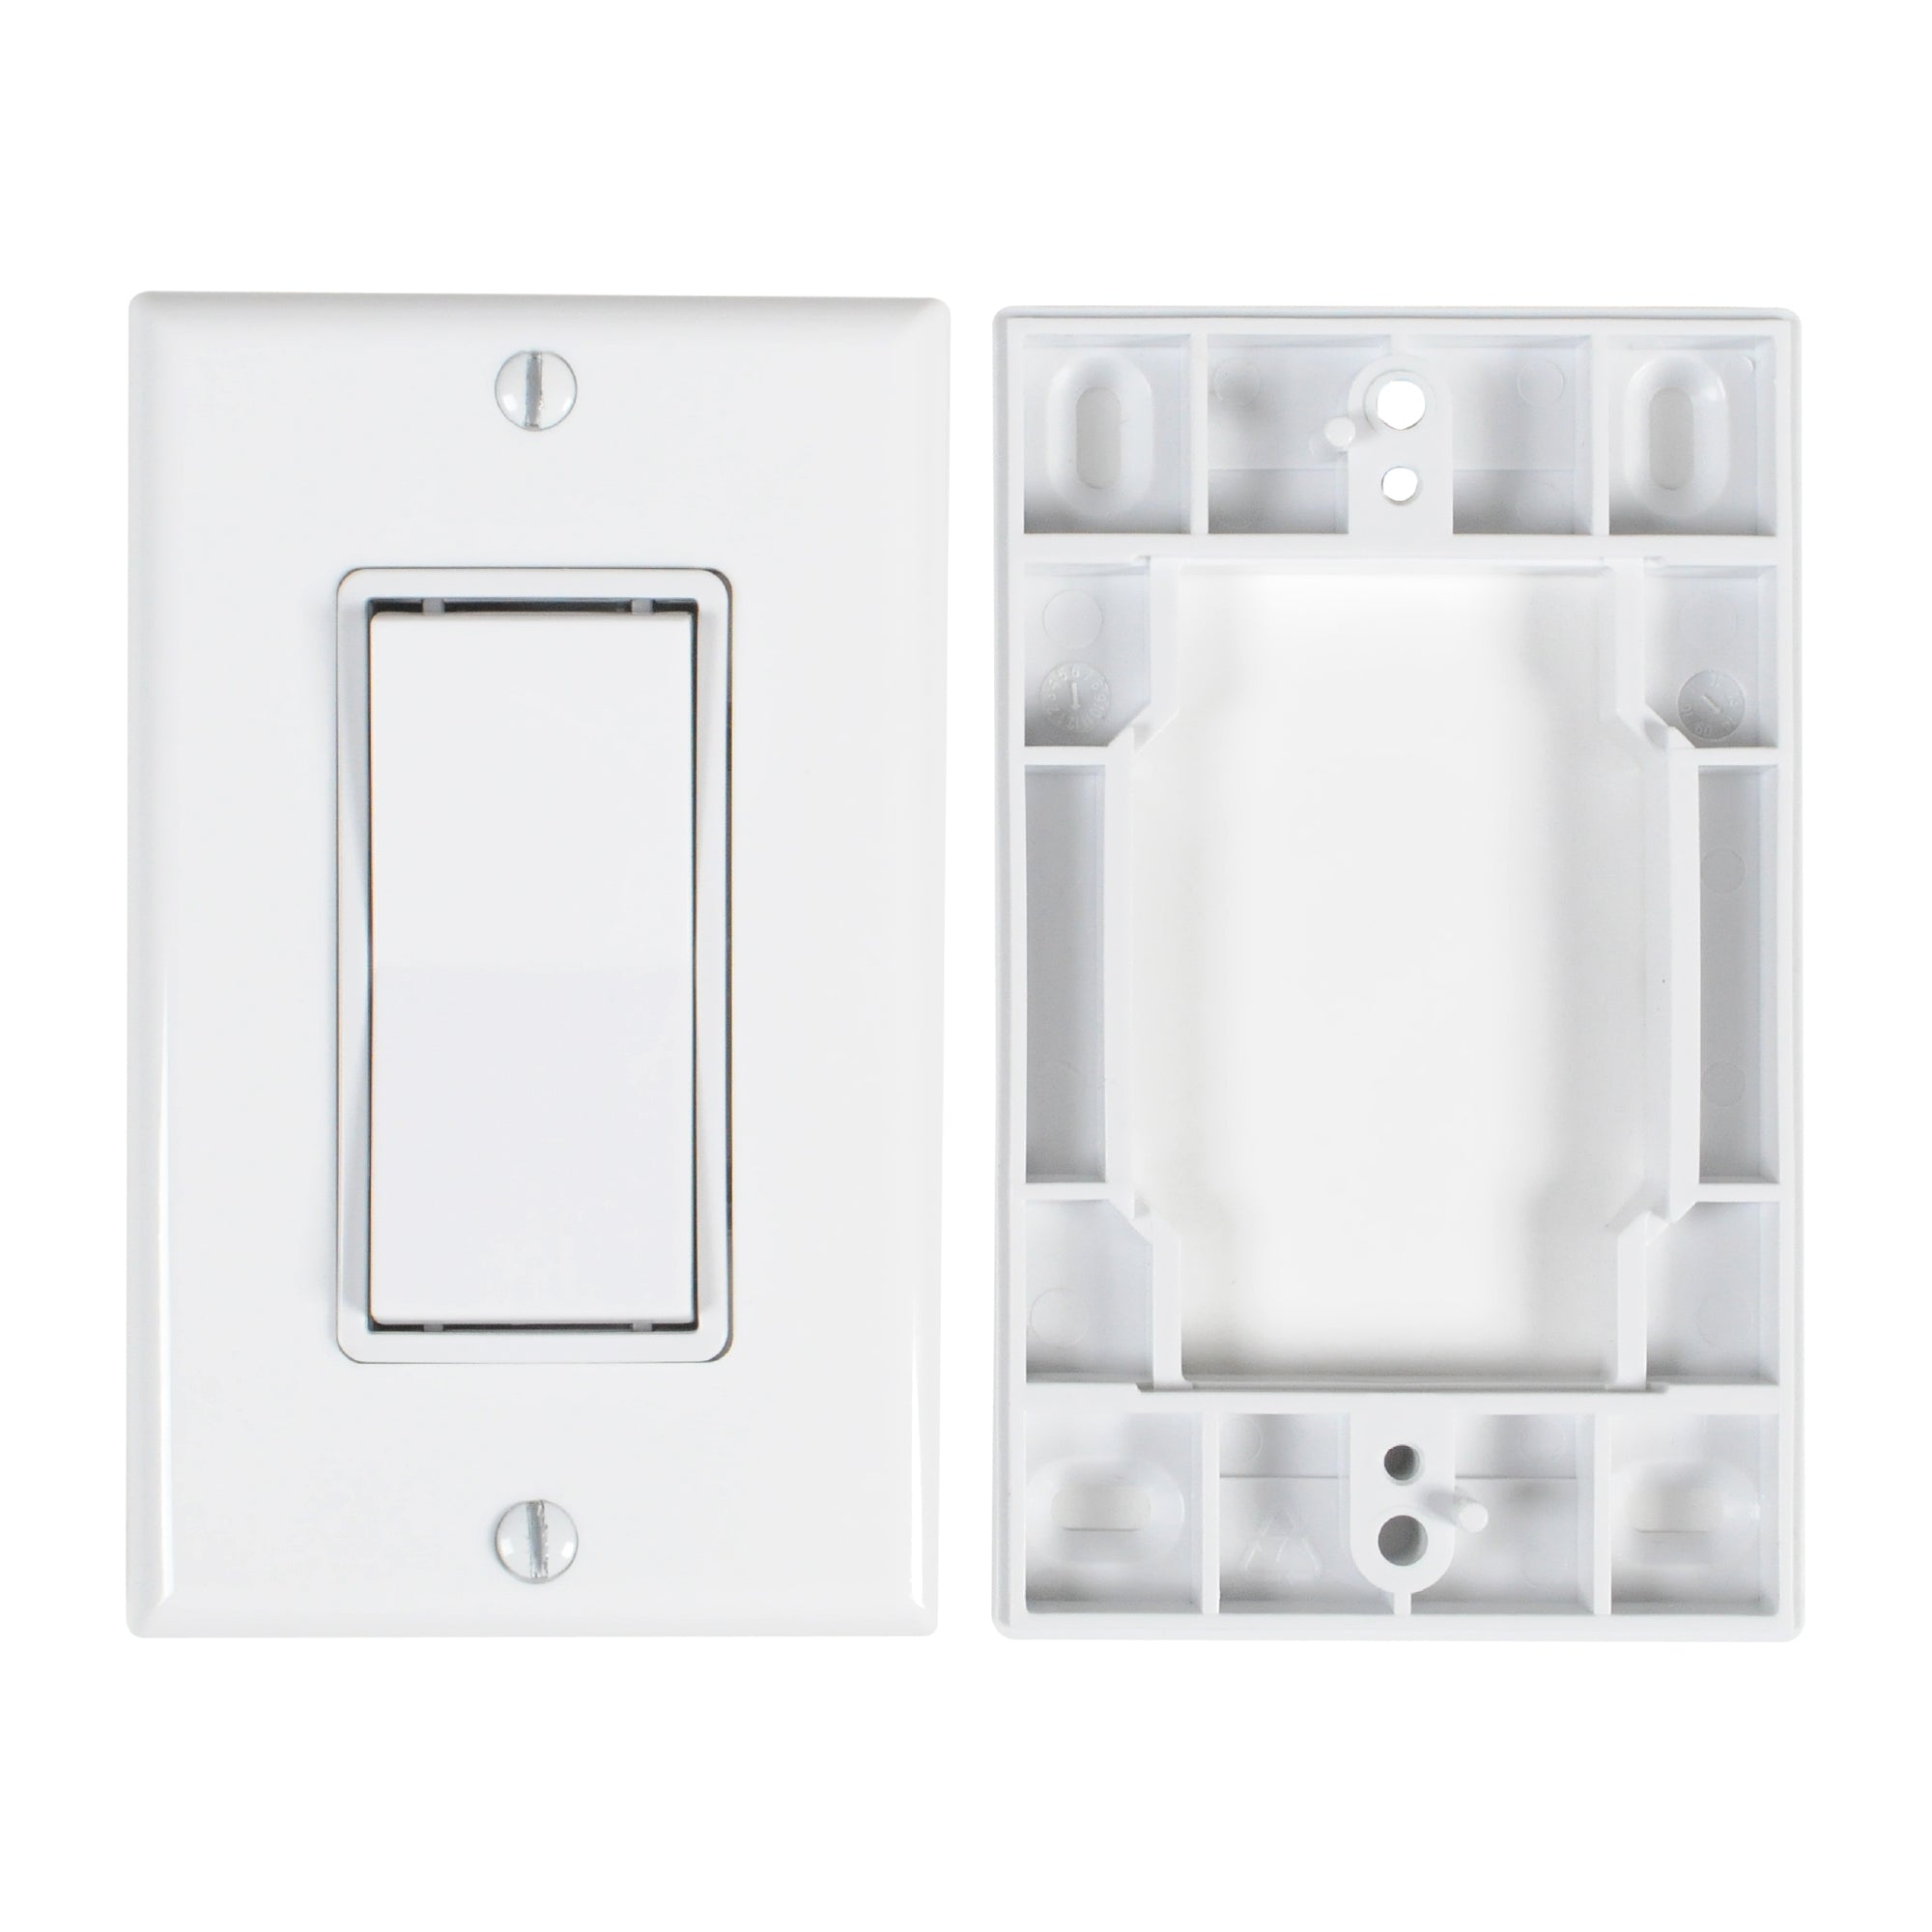 CLEANLIFE® Wireless Powerless Dimmer Switch